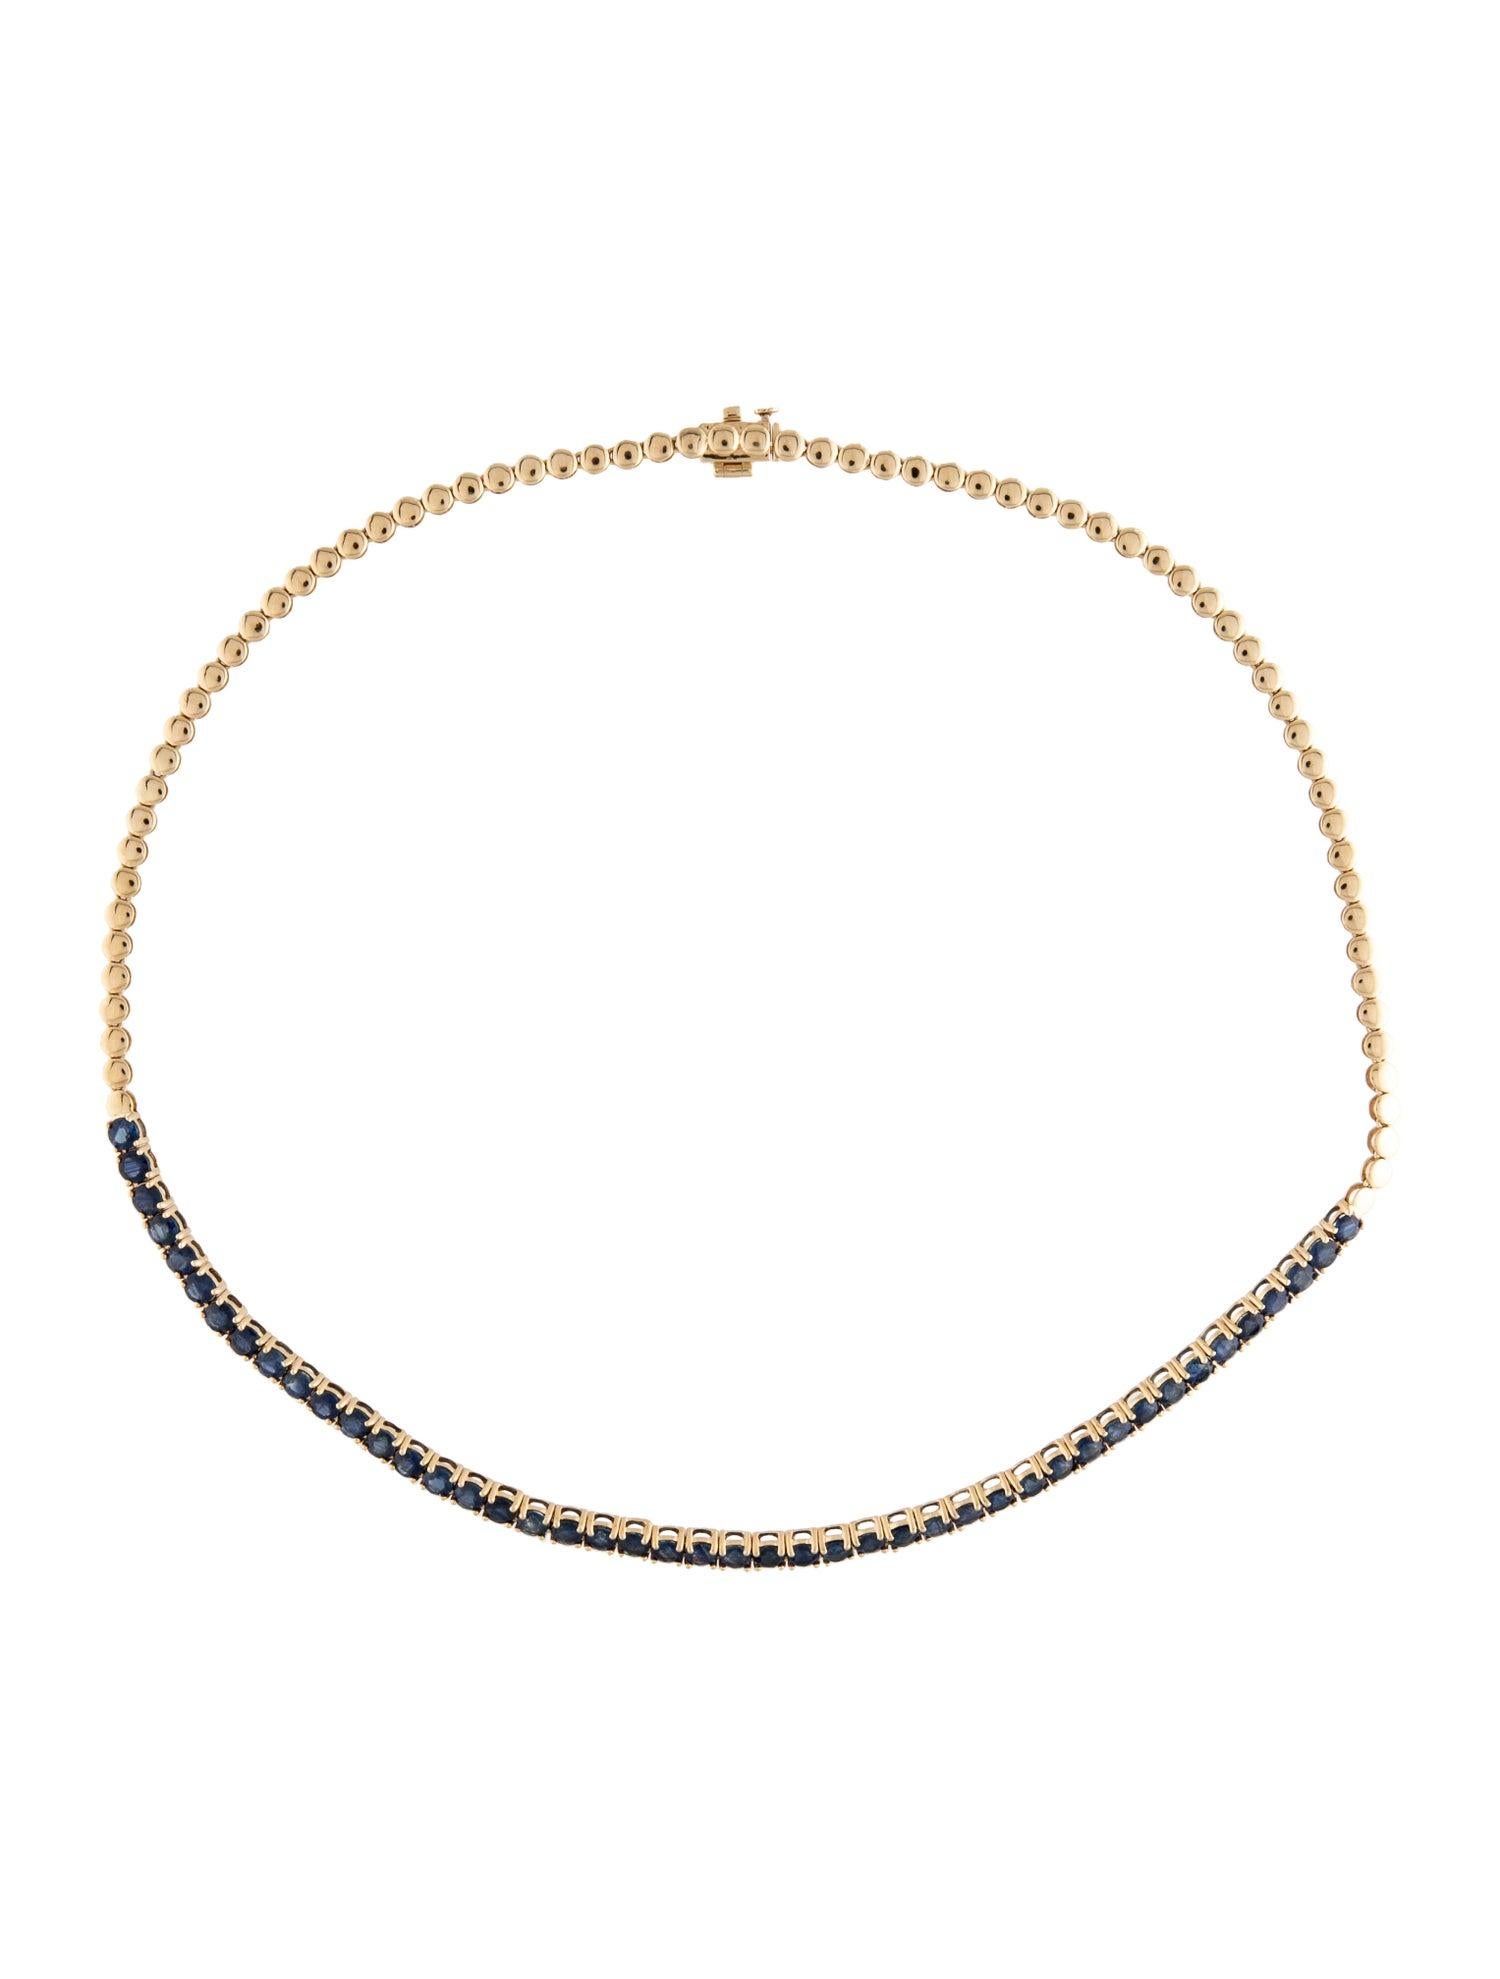 14K Sapphire Collar Necklace 12.42ctw - Stunning Statement Piece for Glamour In New Condition For Sale In Holtsville, NY